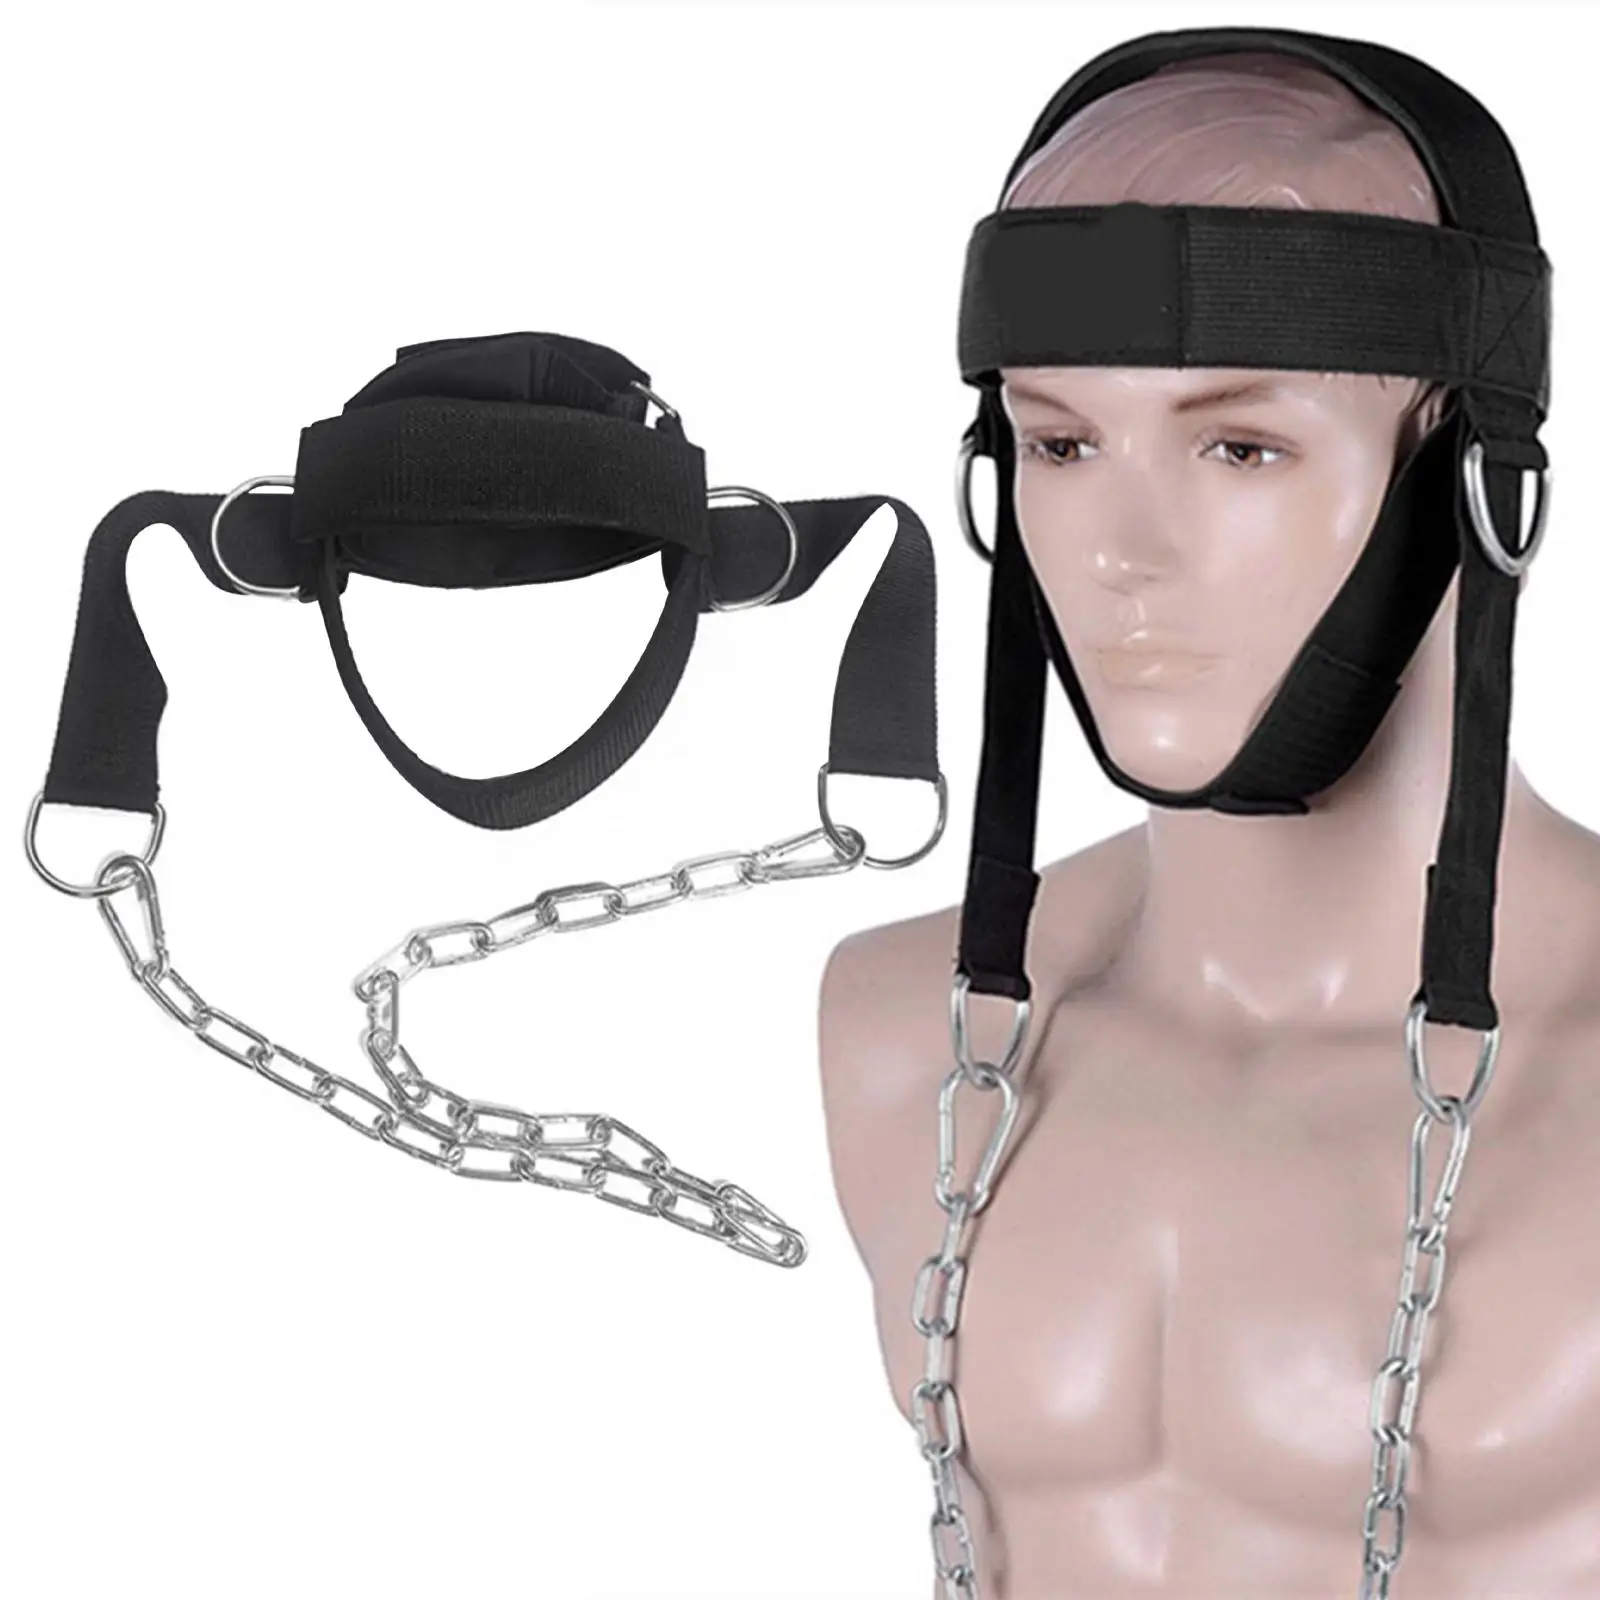 1PC Head Neck Harness Adjustable Durable Equipment for Weight Lifting Gym